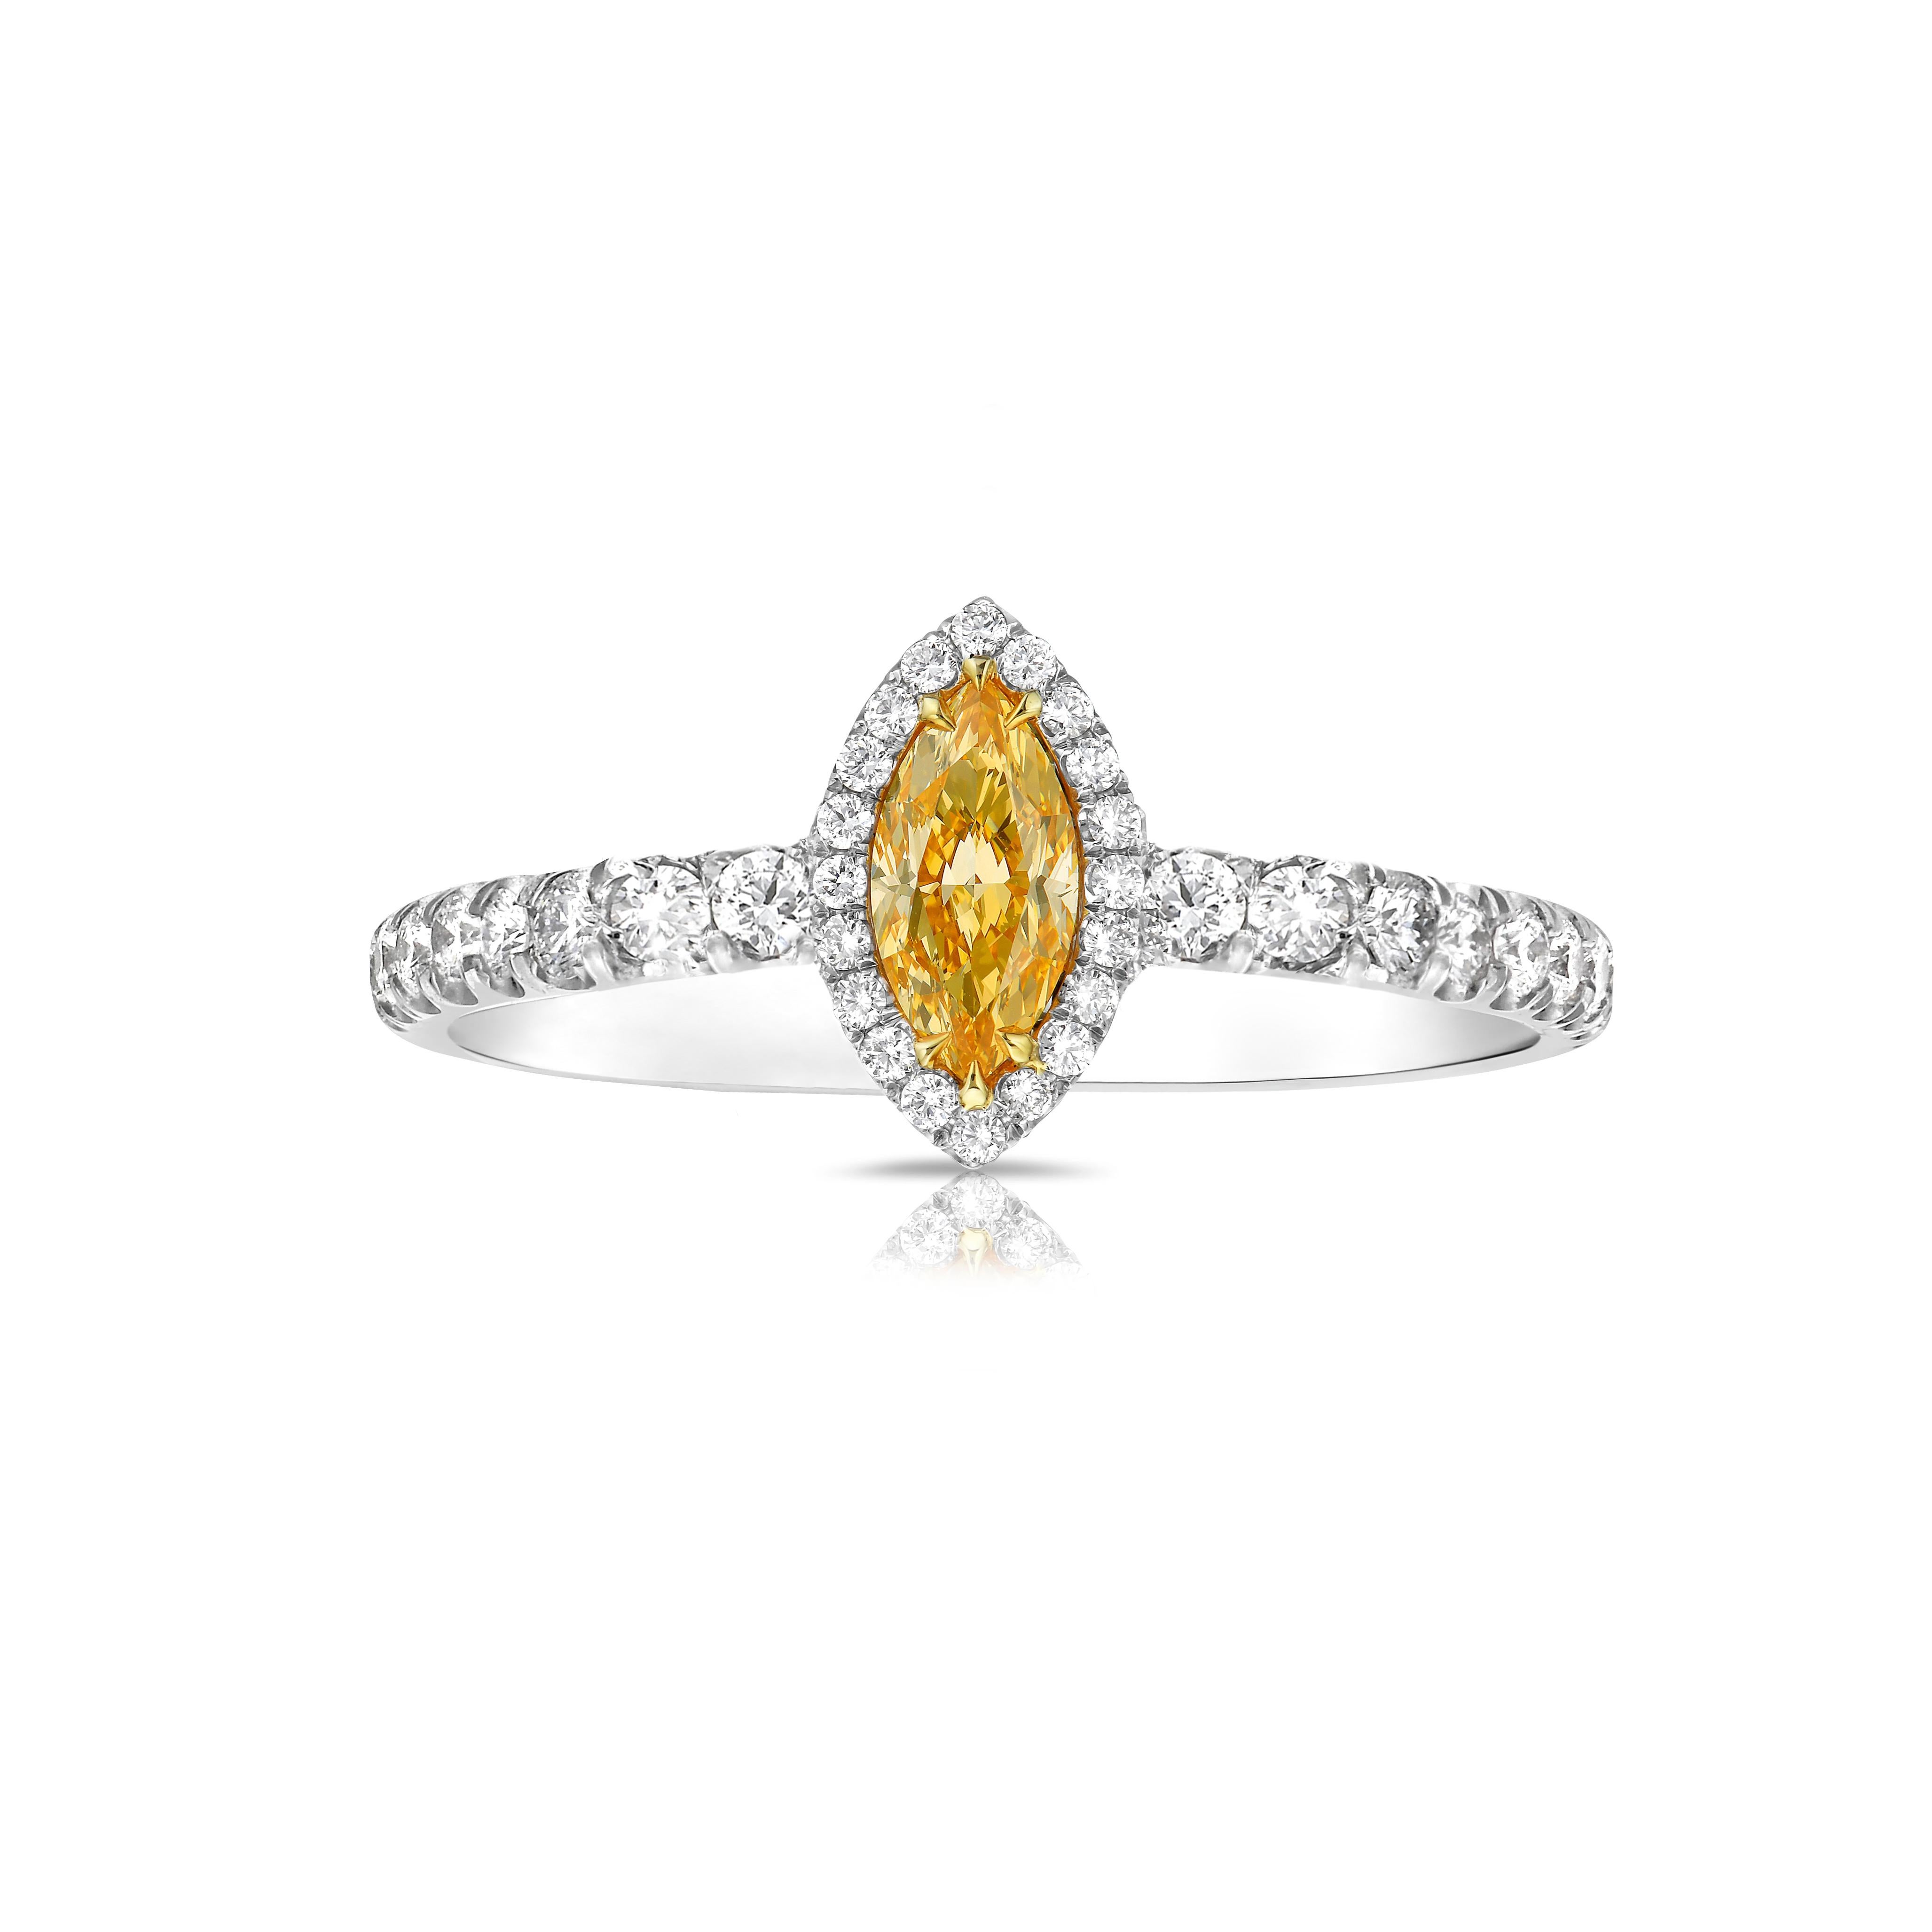 Fancy Yellowish Orange Natural 0.30 carat Marquise cut.
GIA certificate 15830718.
Centering white diamond on white 18K gold ring.

Fancy Yellowish Orange
Dimensions: 6.94 x 3.23 x 2.29 mm.

Can be size upon request. About 10 days would be